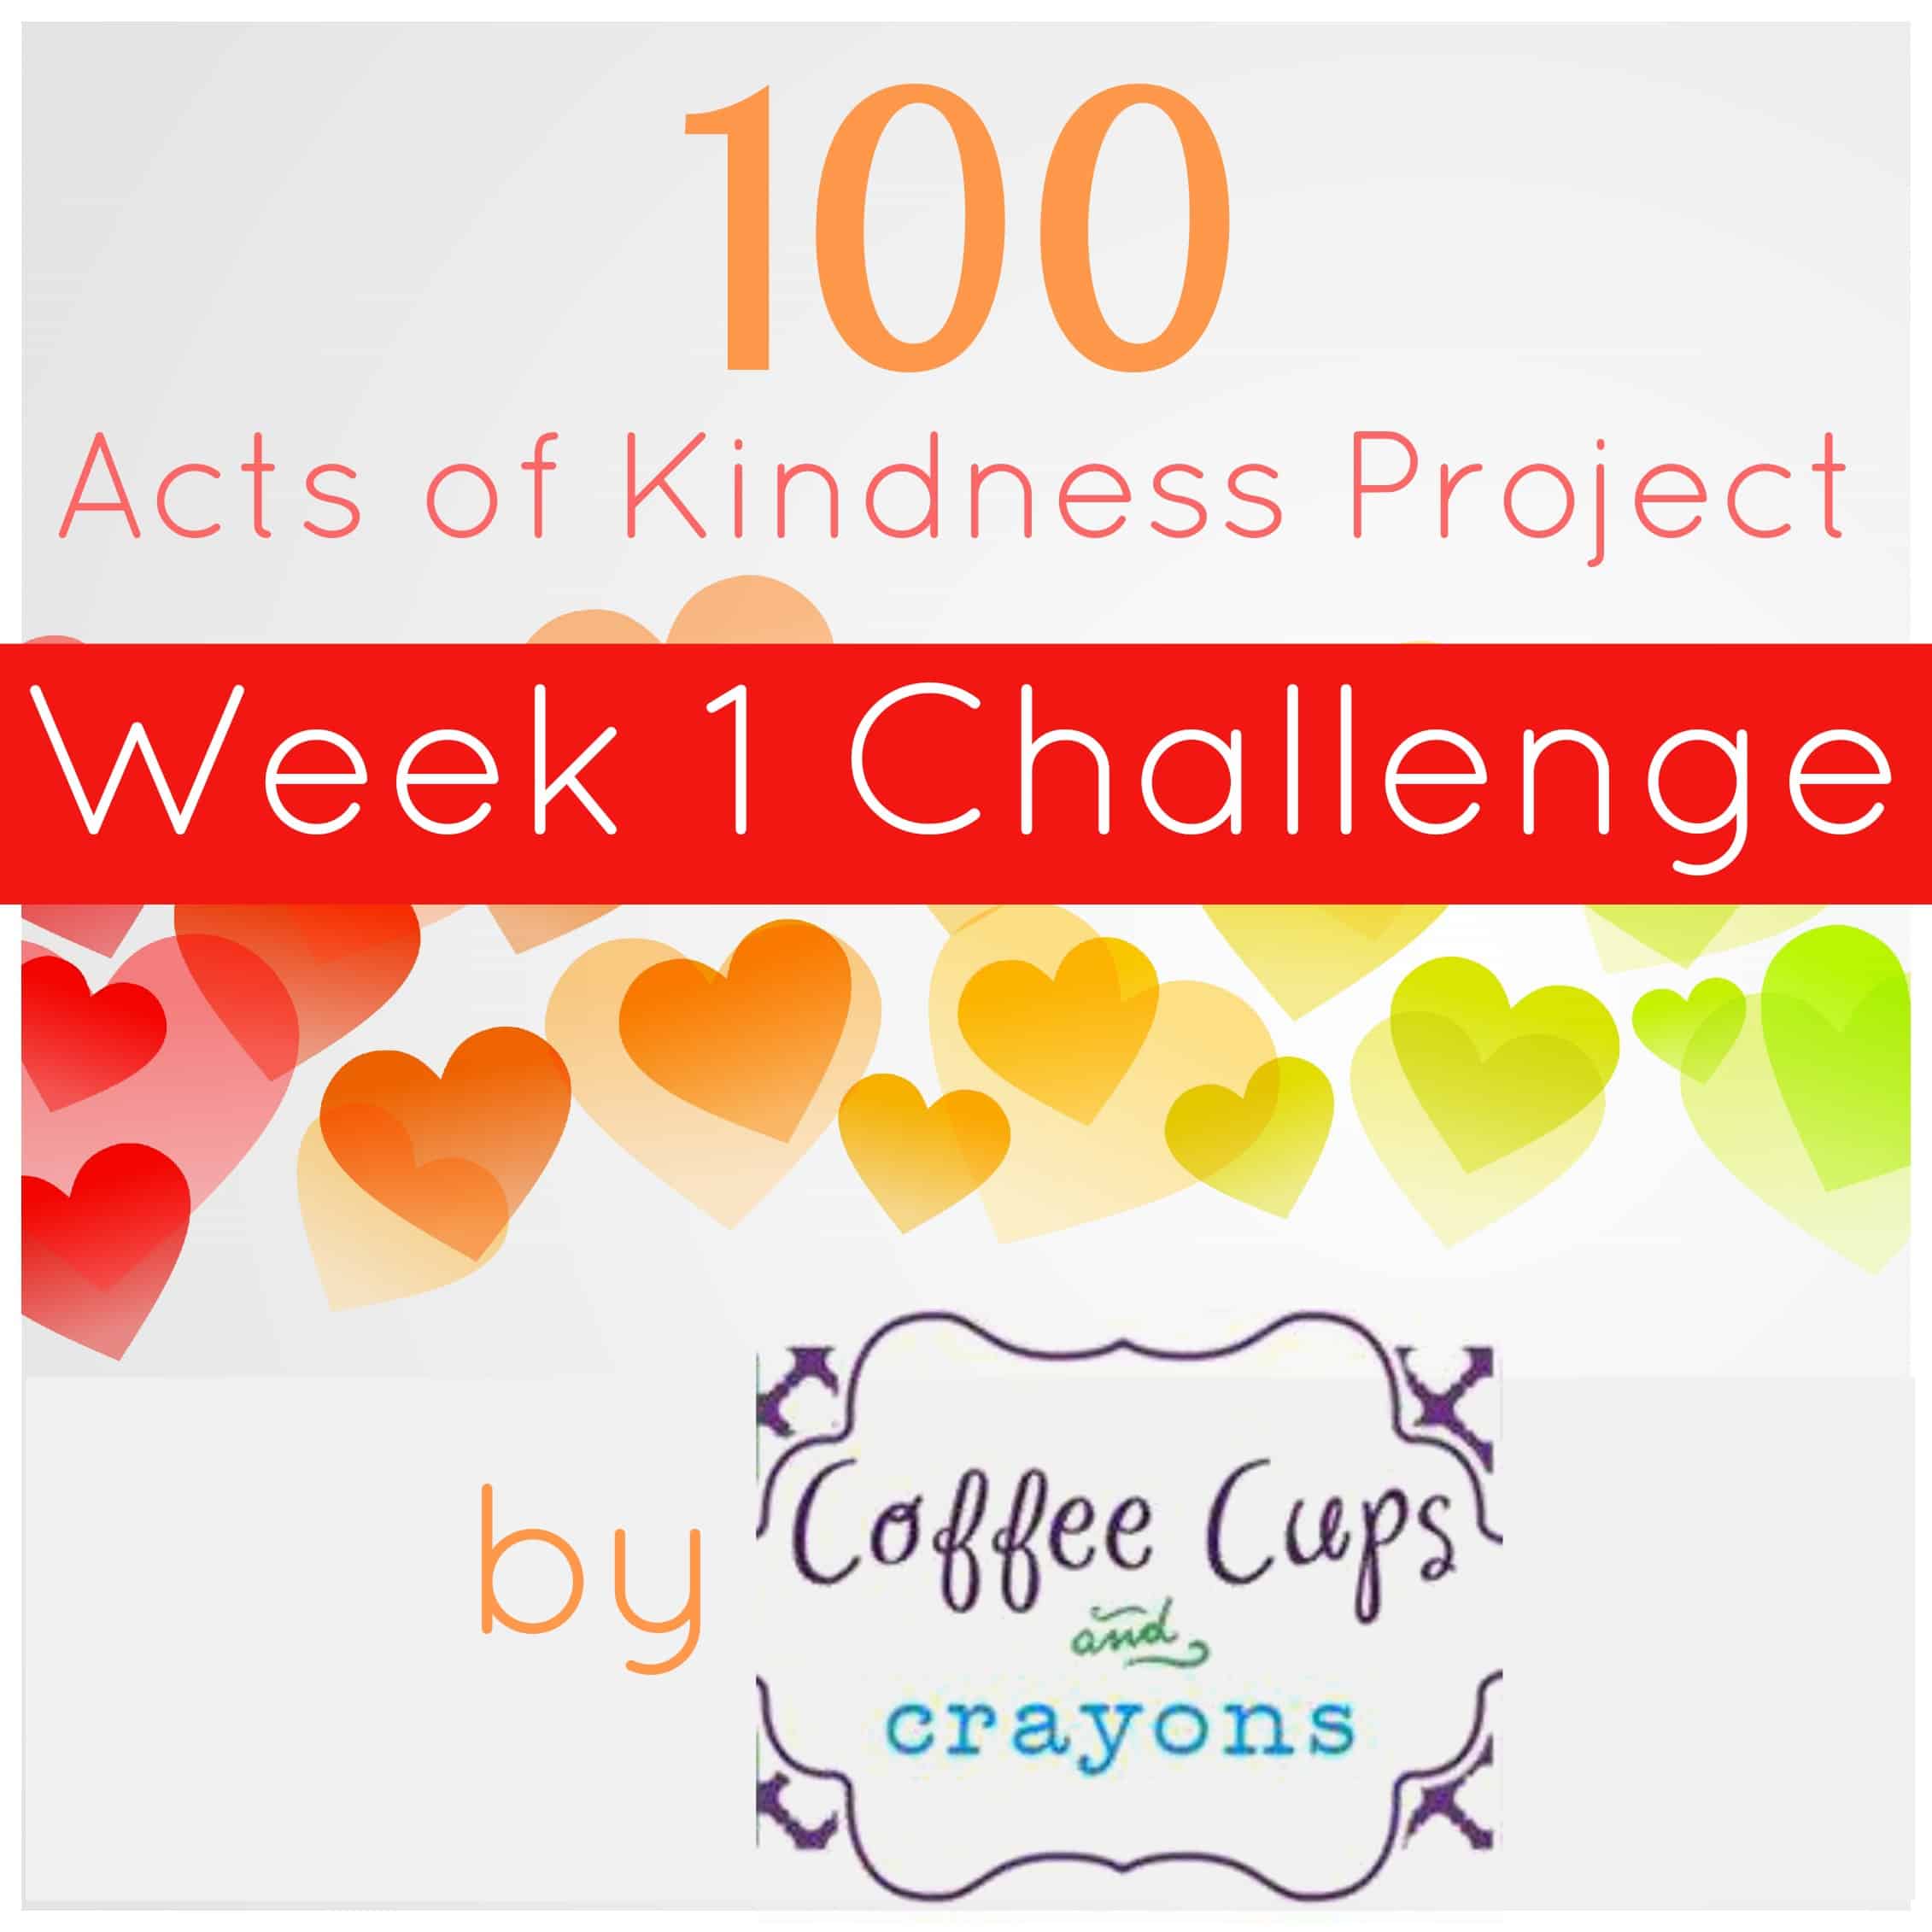 100 Acts of Kindness Week 1 Challenge from Coffee Cups and Crayons